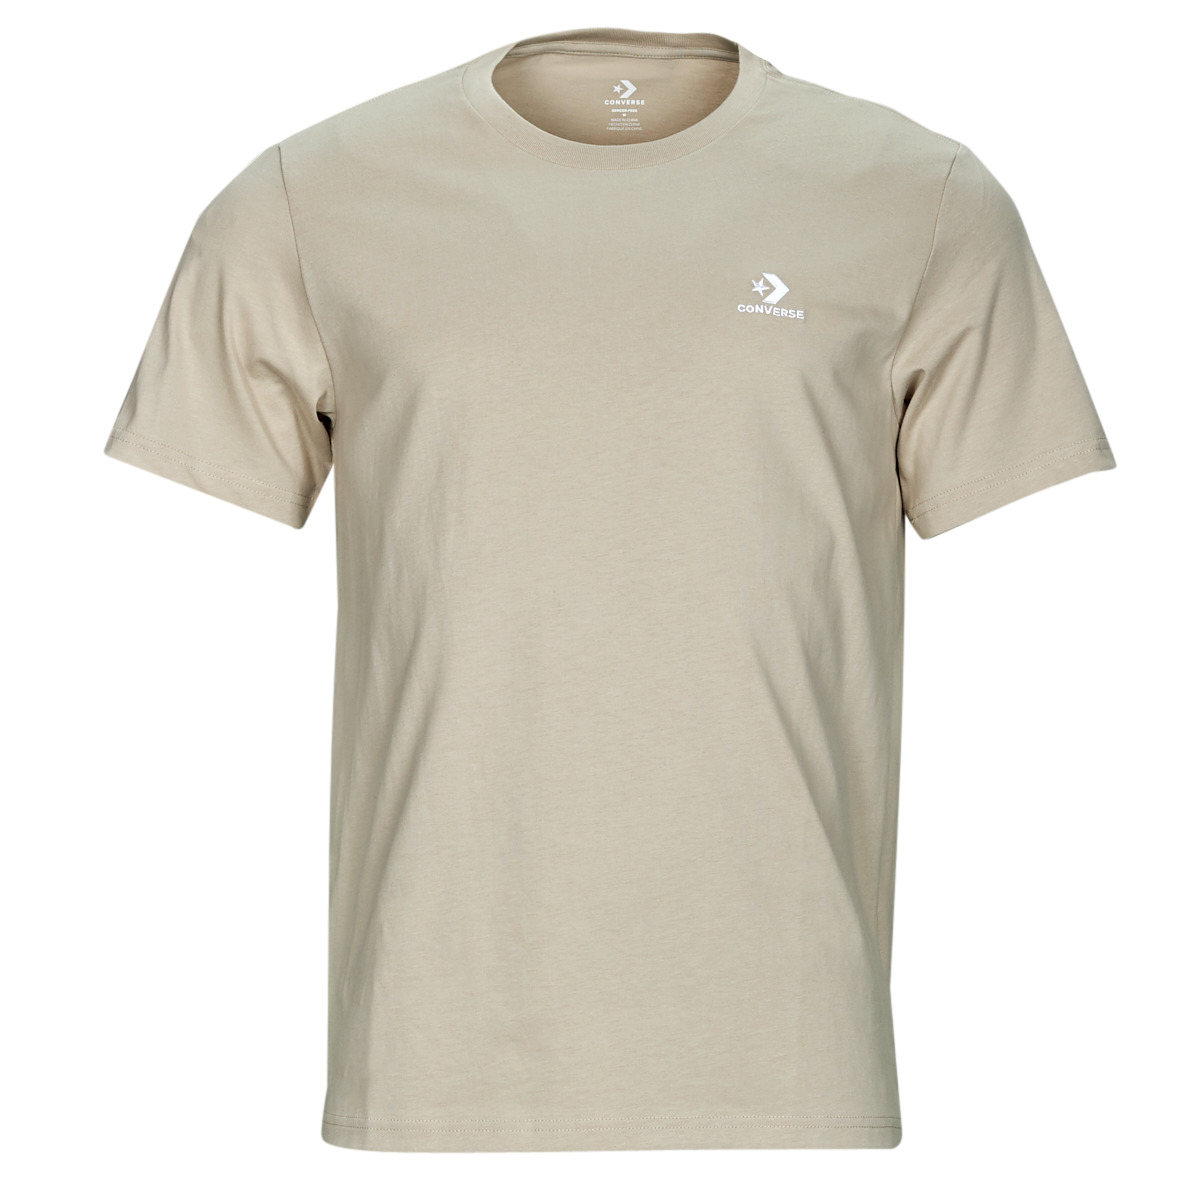 Europe | Fast delivery 22,40 - CHEVRON short-sleeved - TEE Spartoo STAR € EMBROIDERED GO-TO Beige Men t-shirts ! Converse Clothing